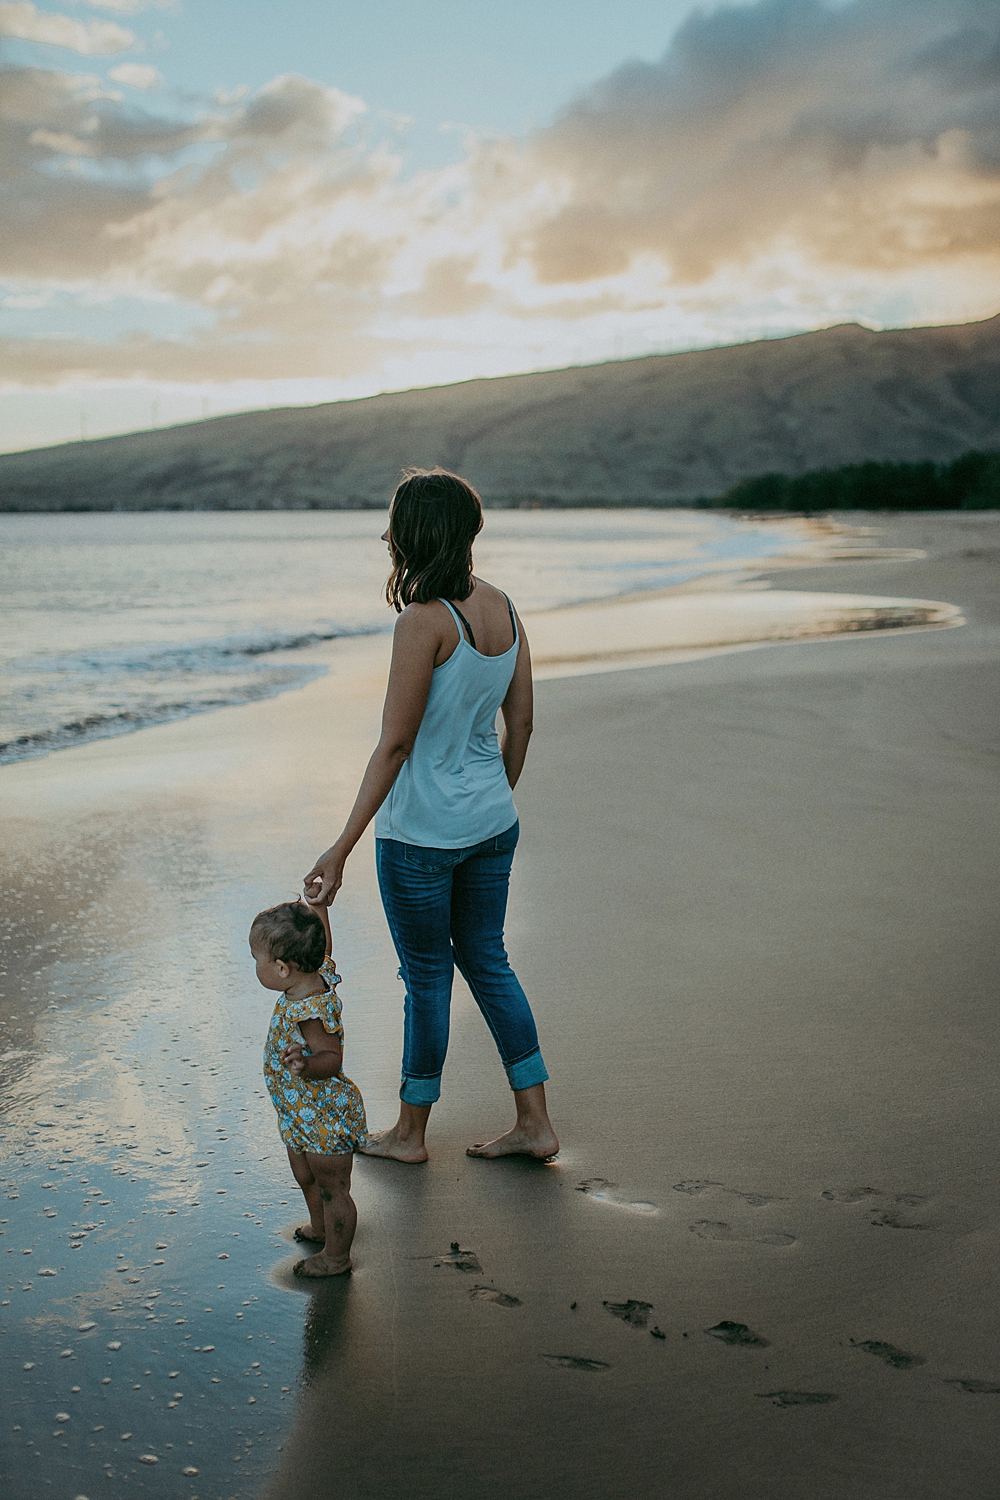 Foster care family in Maui, Hawaii shares about their journey.